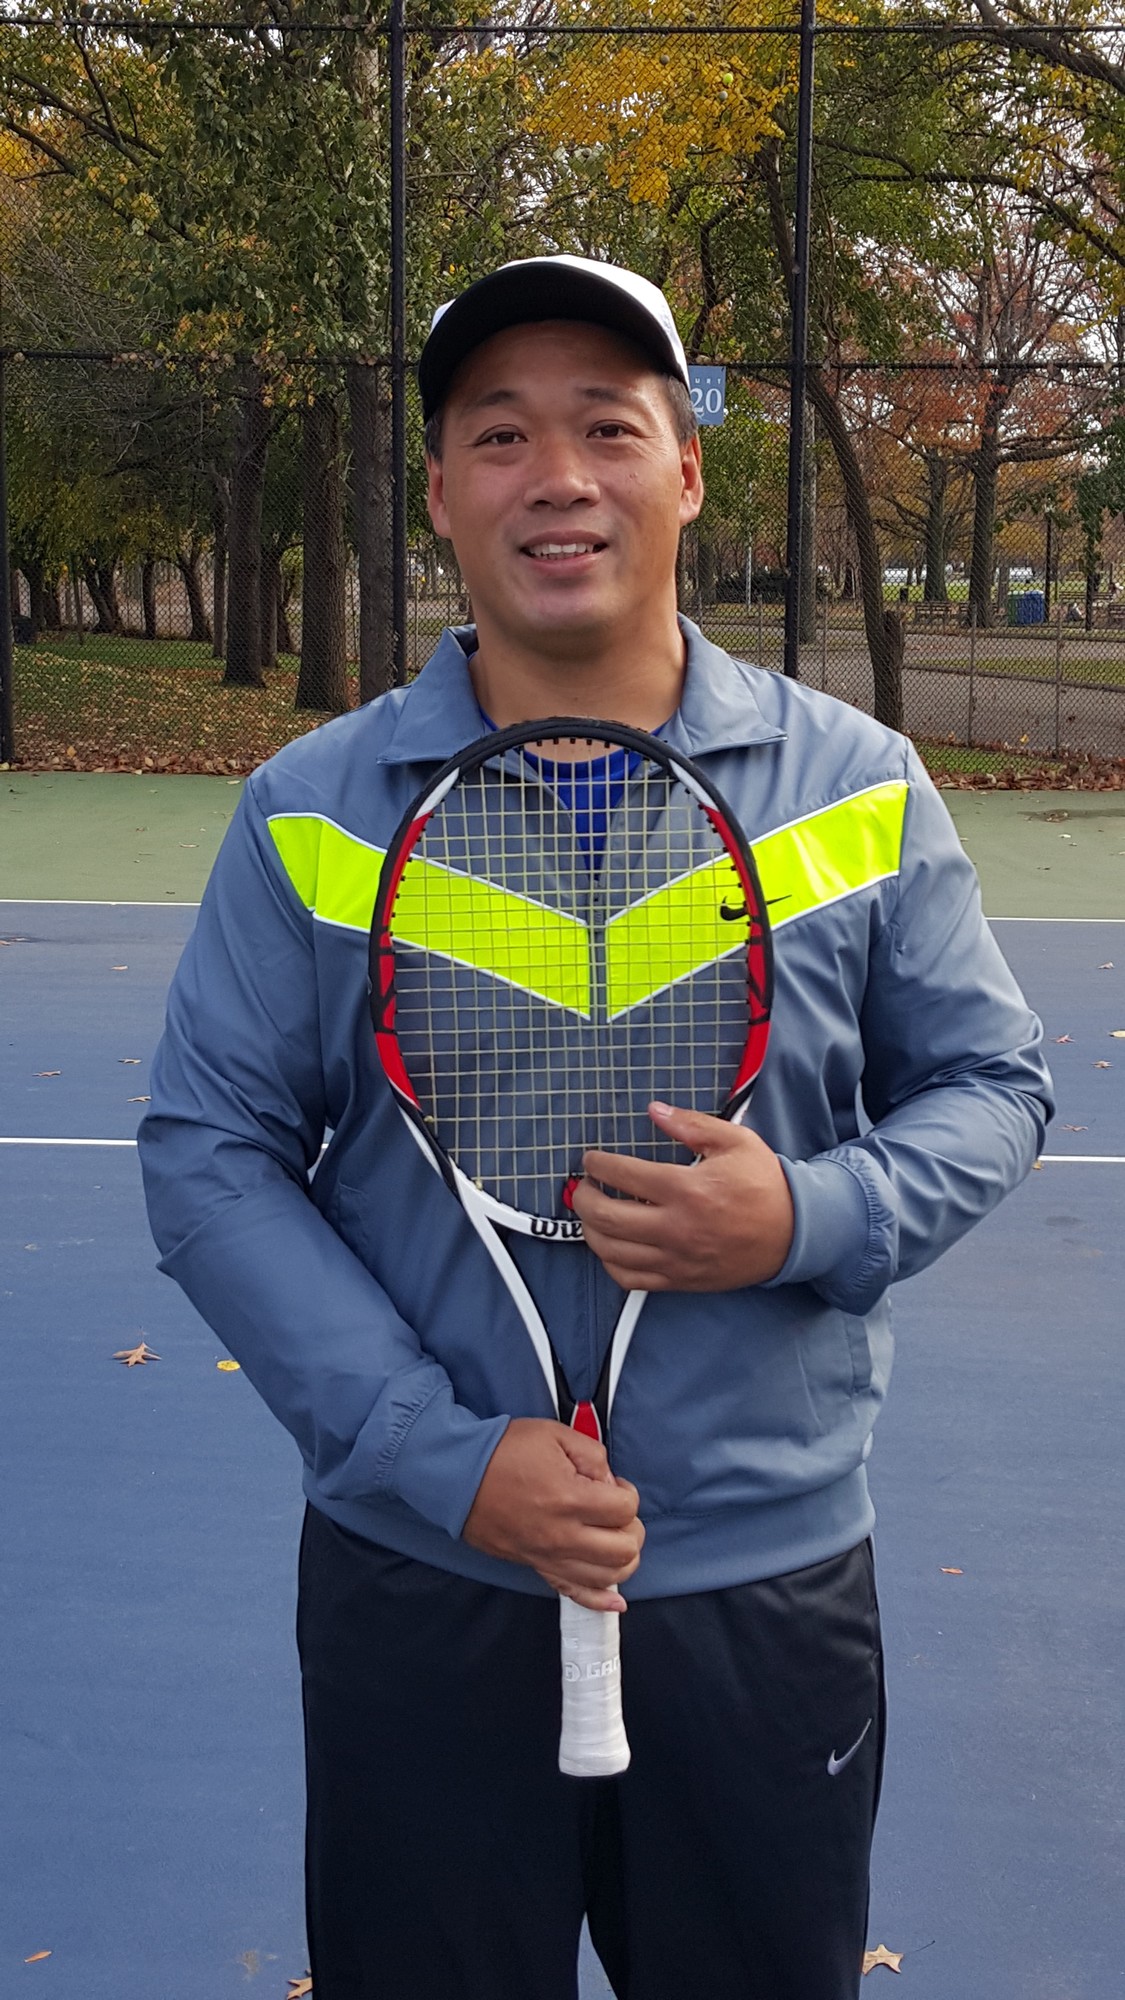 Warren F. teaches tennis lessons in Oakland Gardens, NY